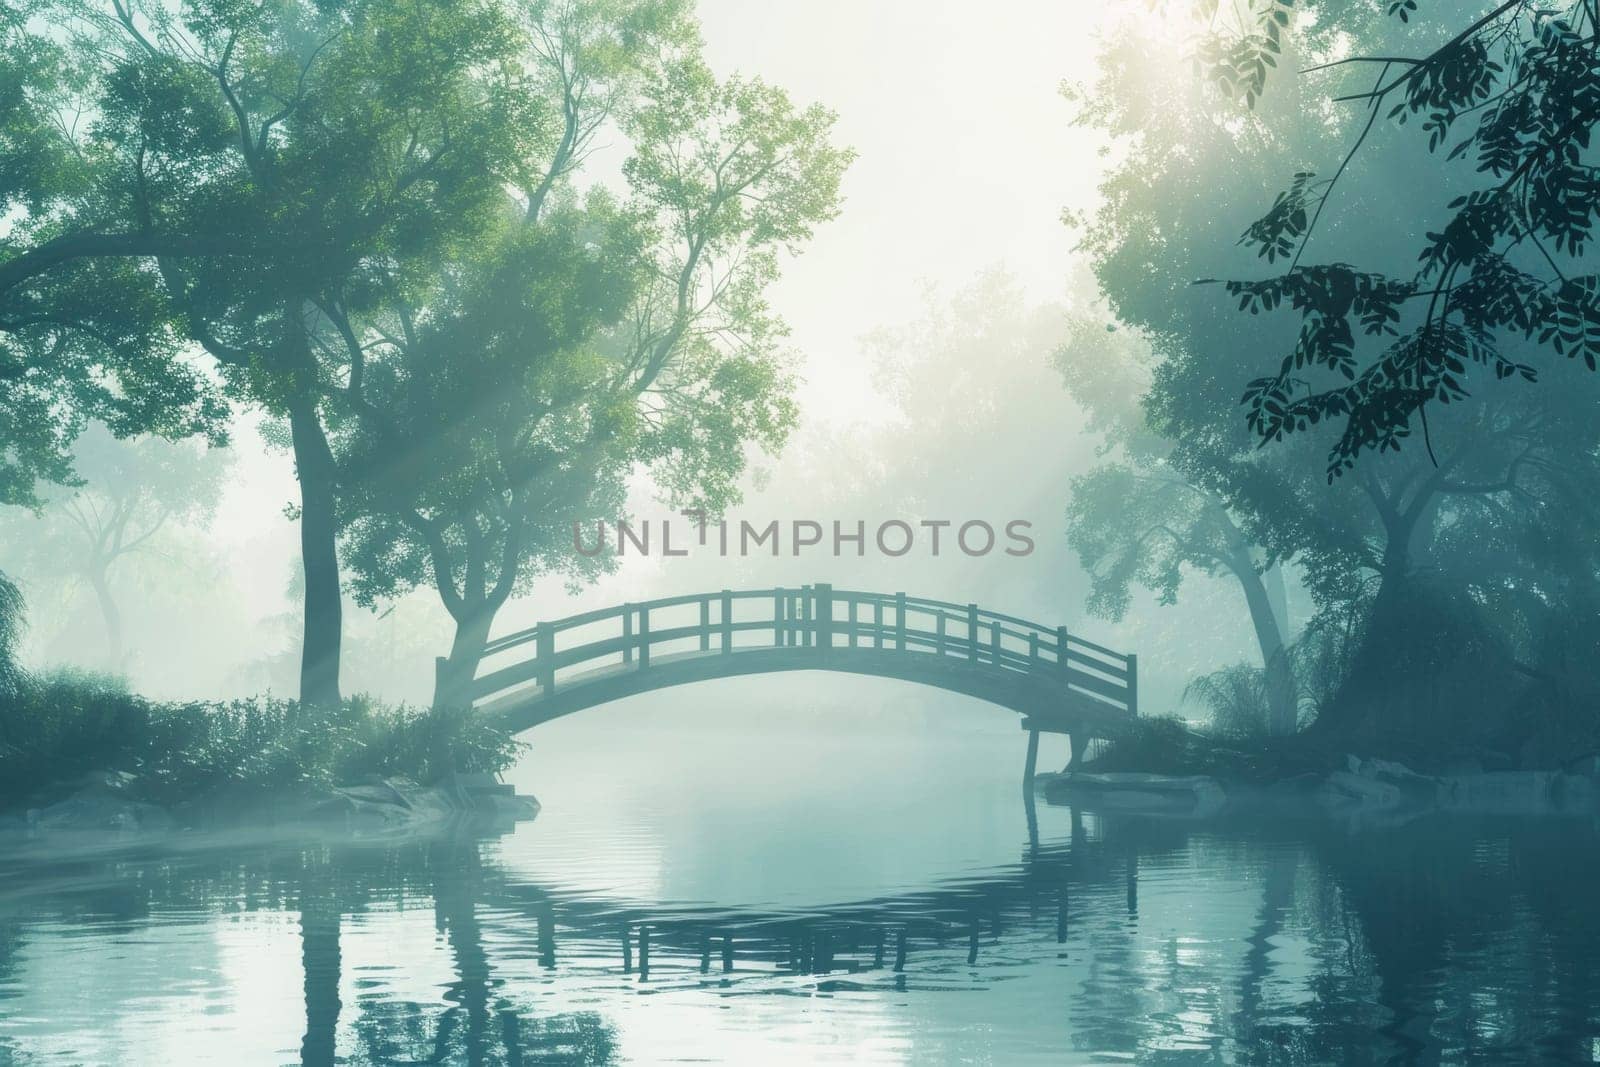 A traditional wooden bridge arches gracefully over a misty river in a tranquil forest setting. The scene embodies peace and the connection with nature